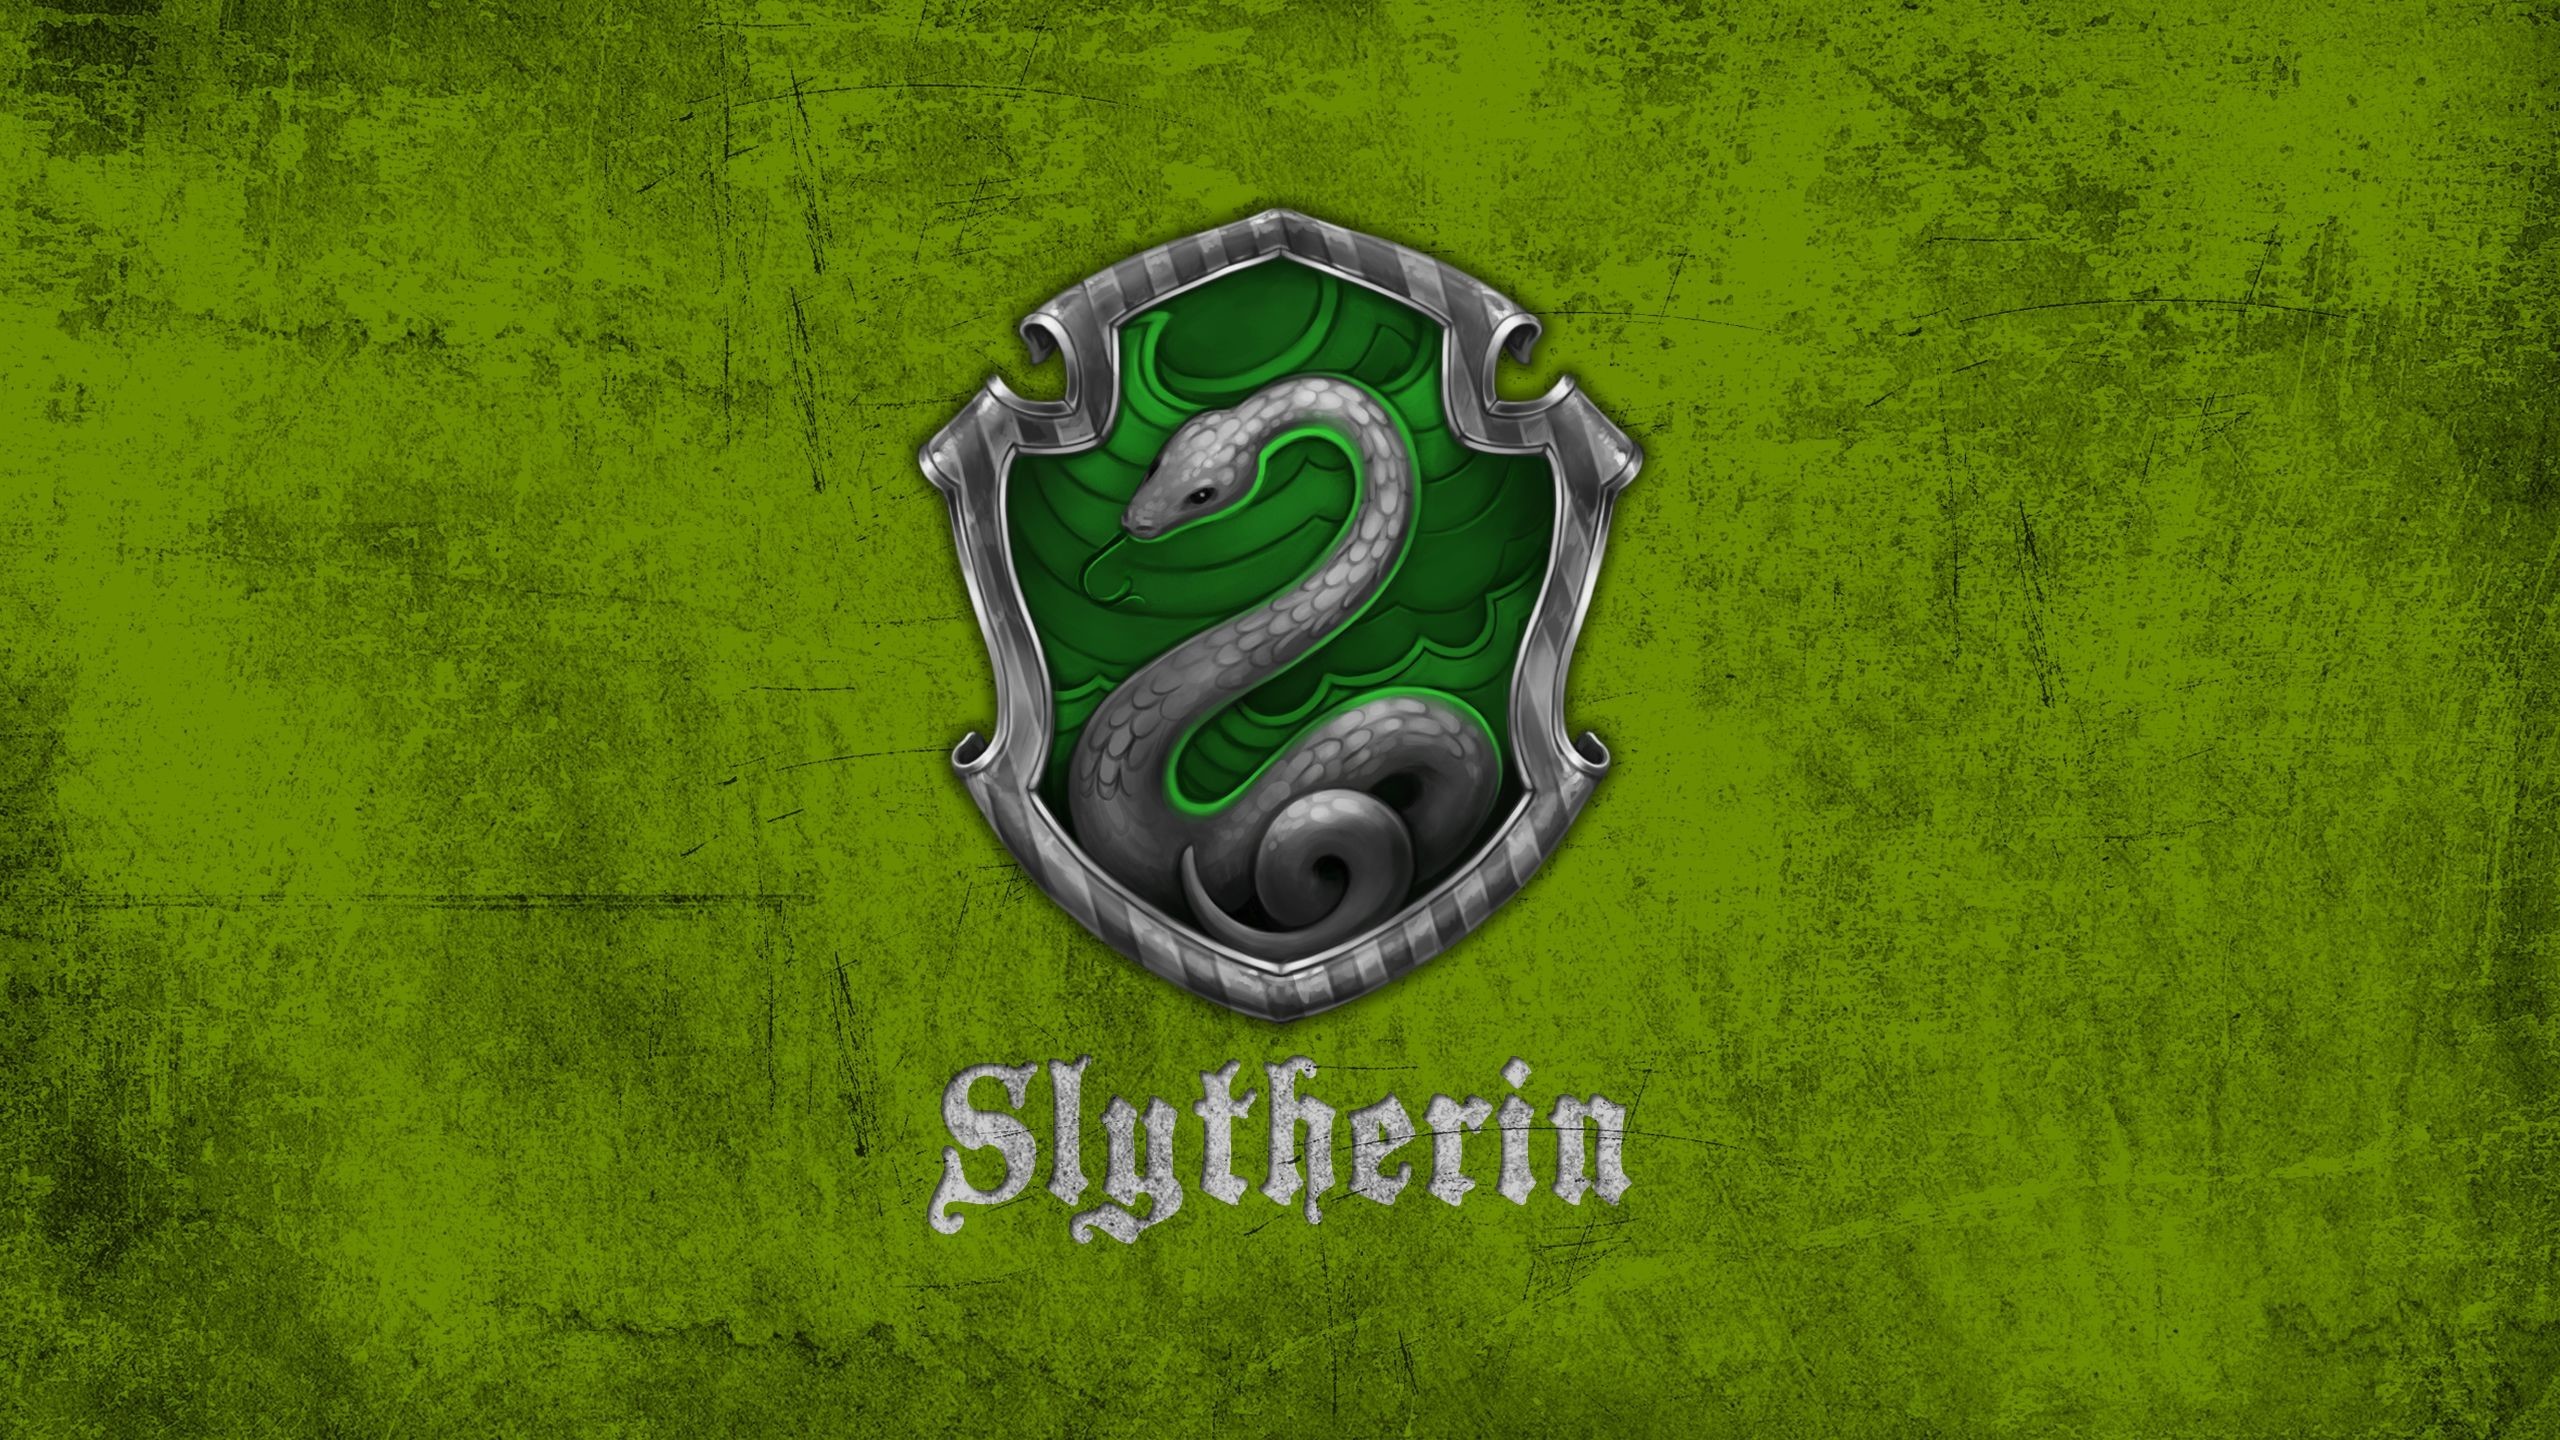 2560x1440 1920x1080 Wallpaper for all the Slytherins | Slytherin | Pinterest